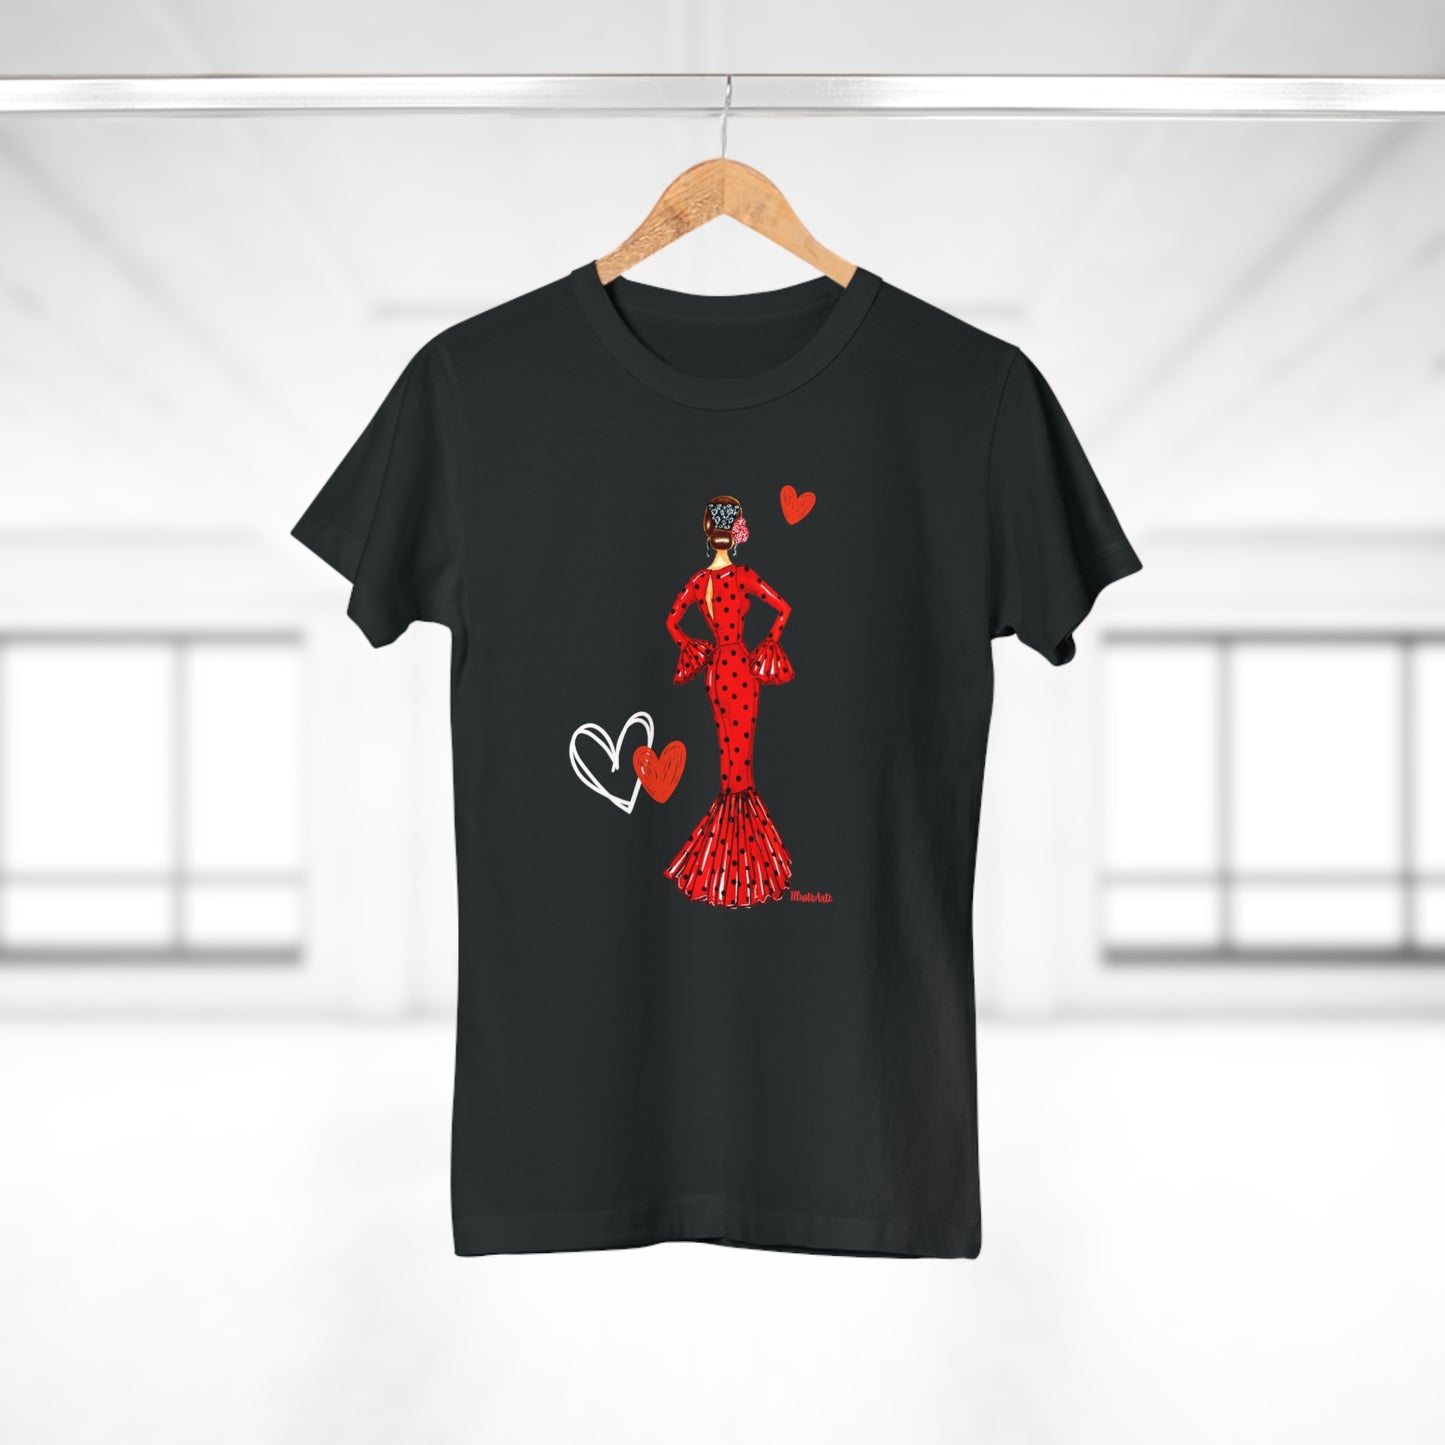 a t - shirt with a woman in a red dress holding a heart